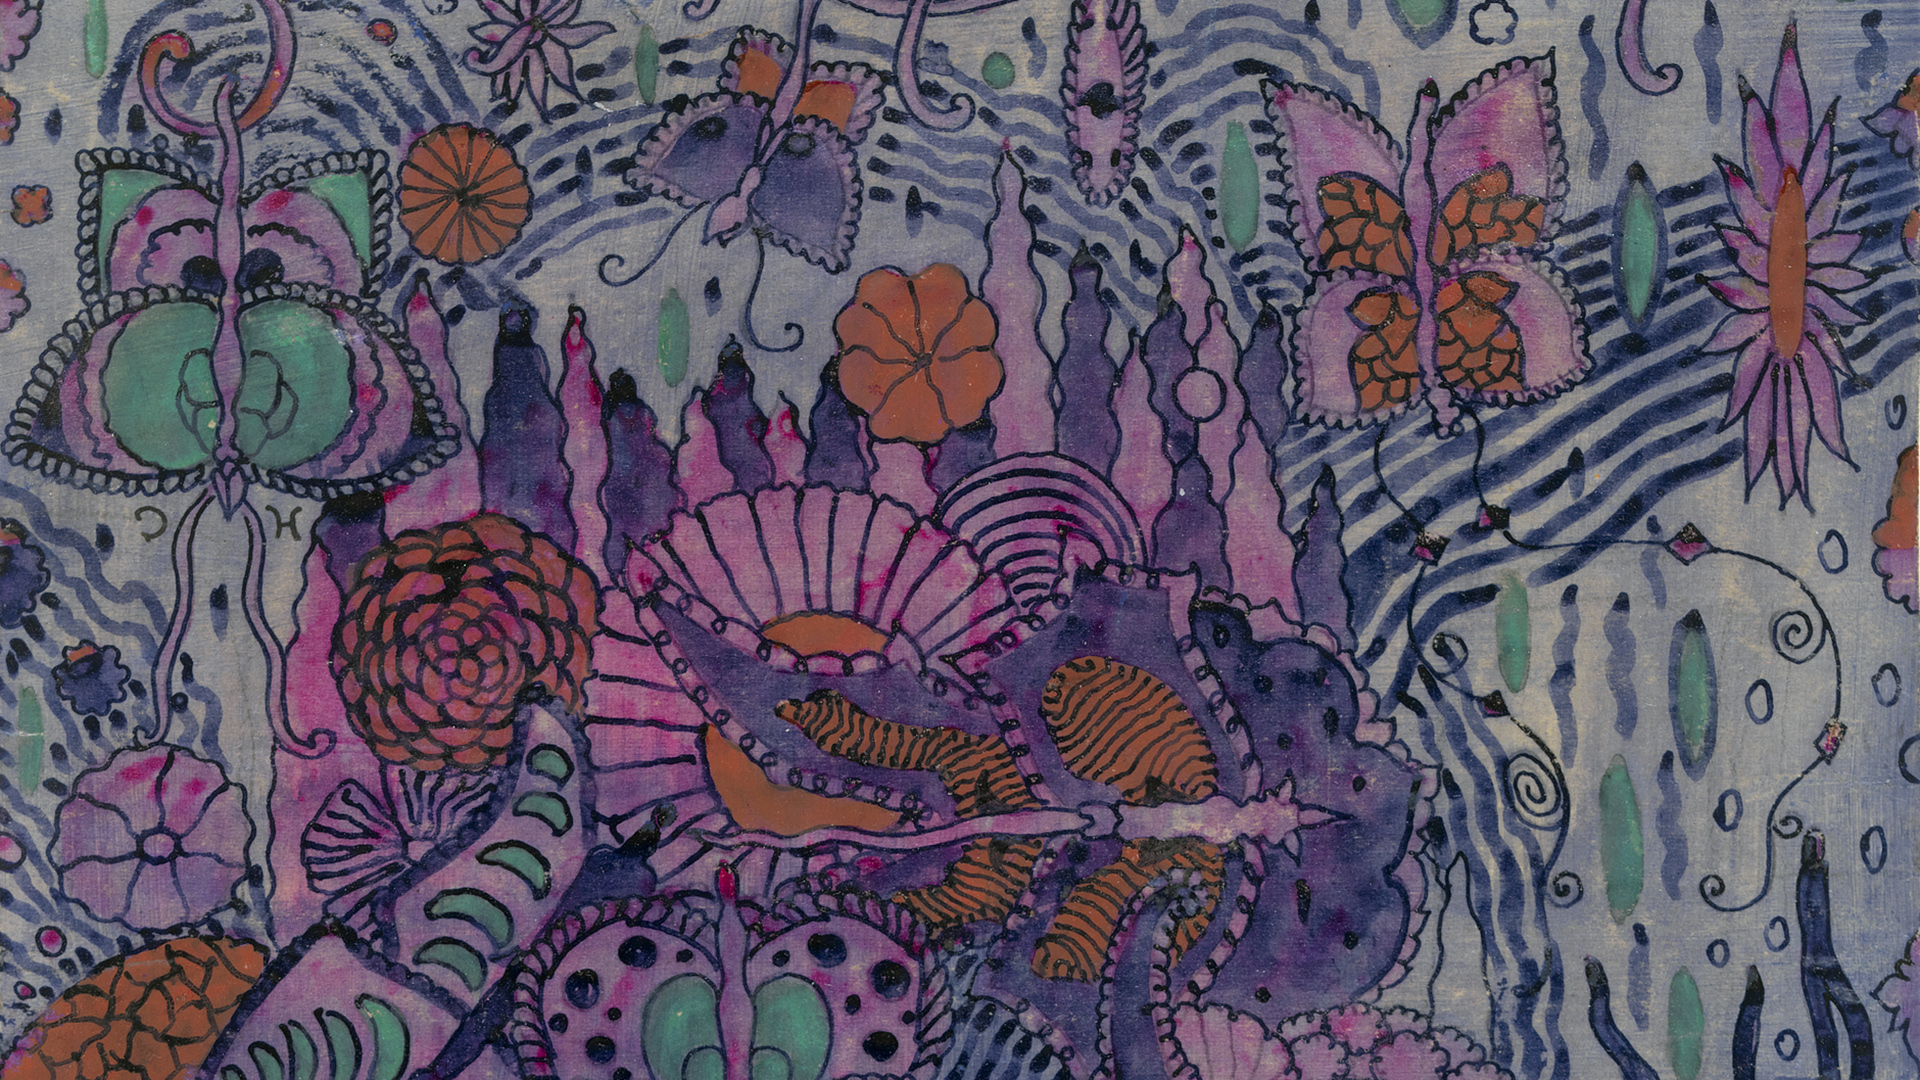 Intricate pattern with floral and butterfly designs in shades of pink, purple, orange and green